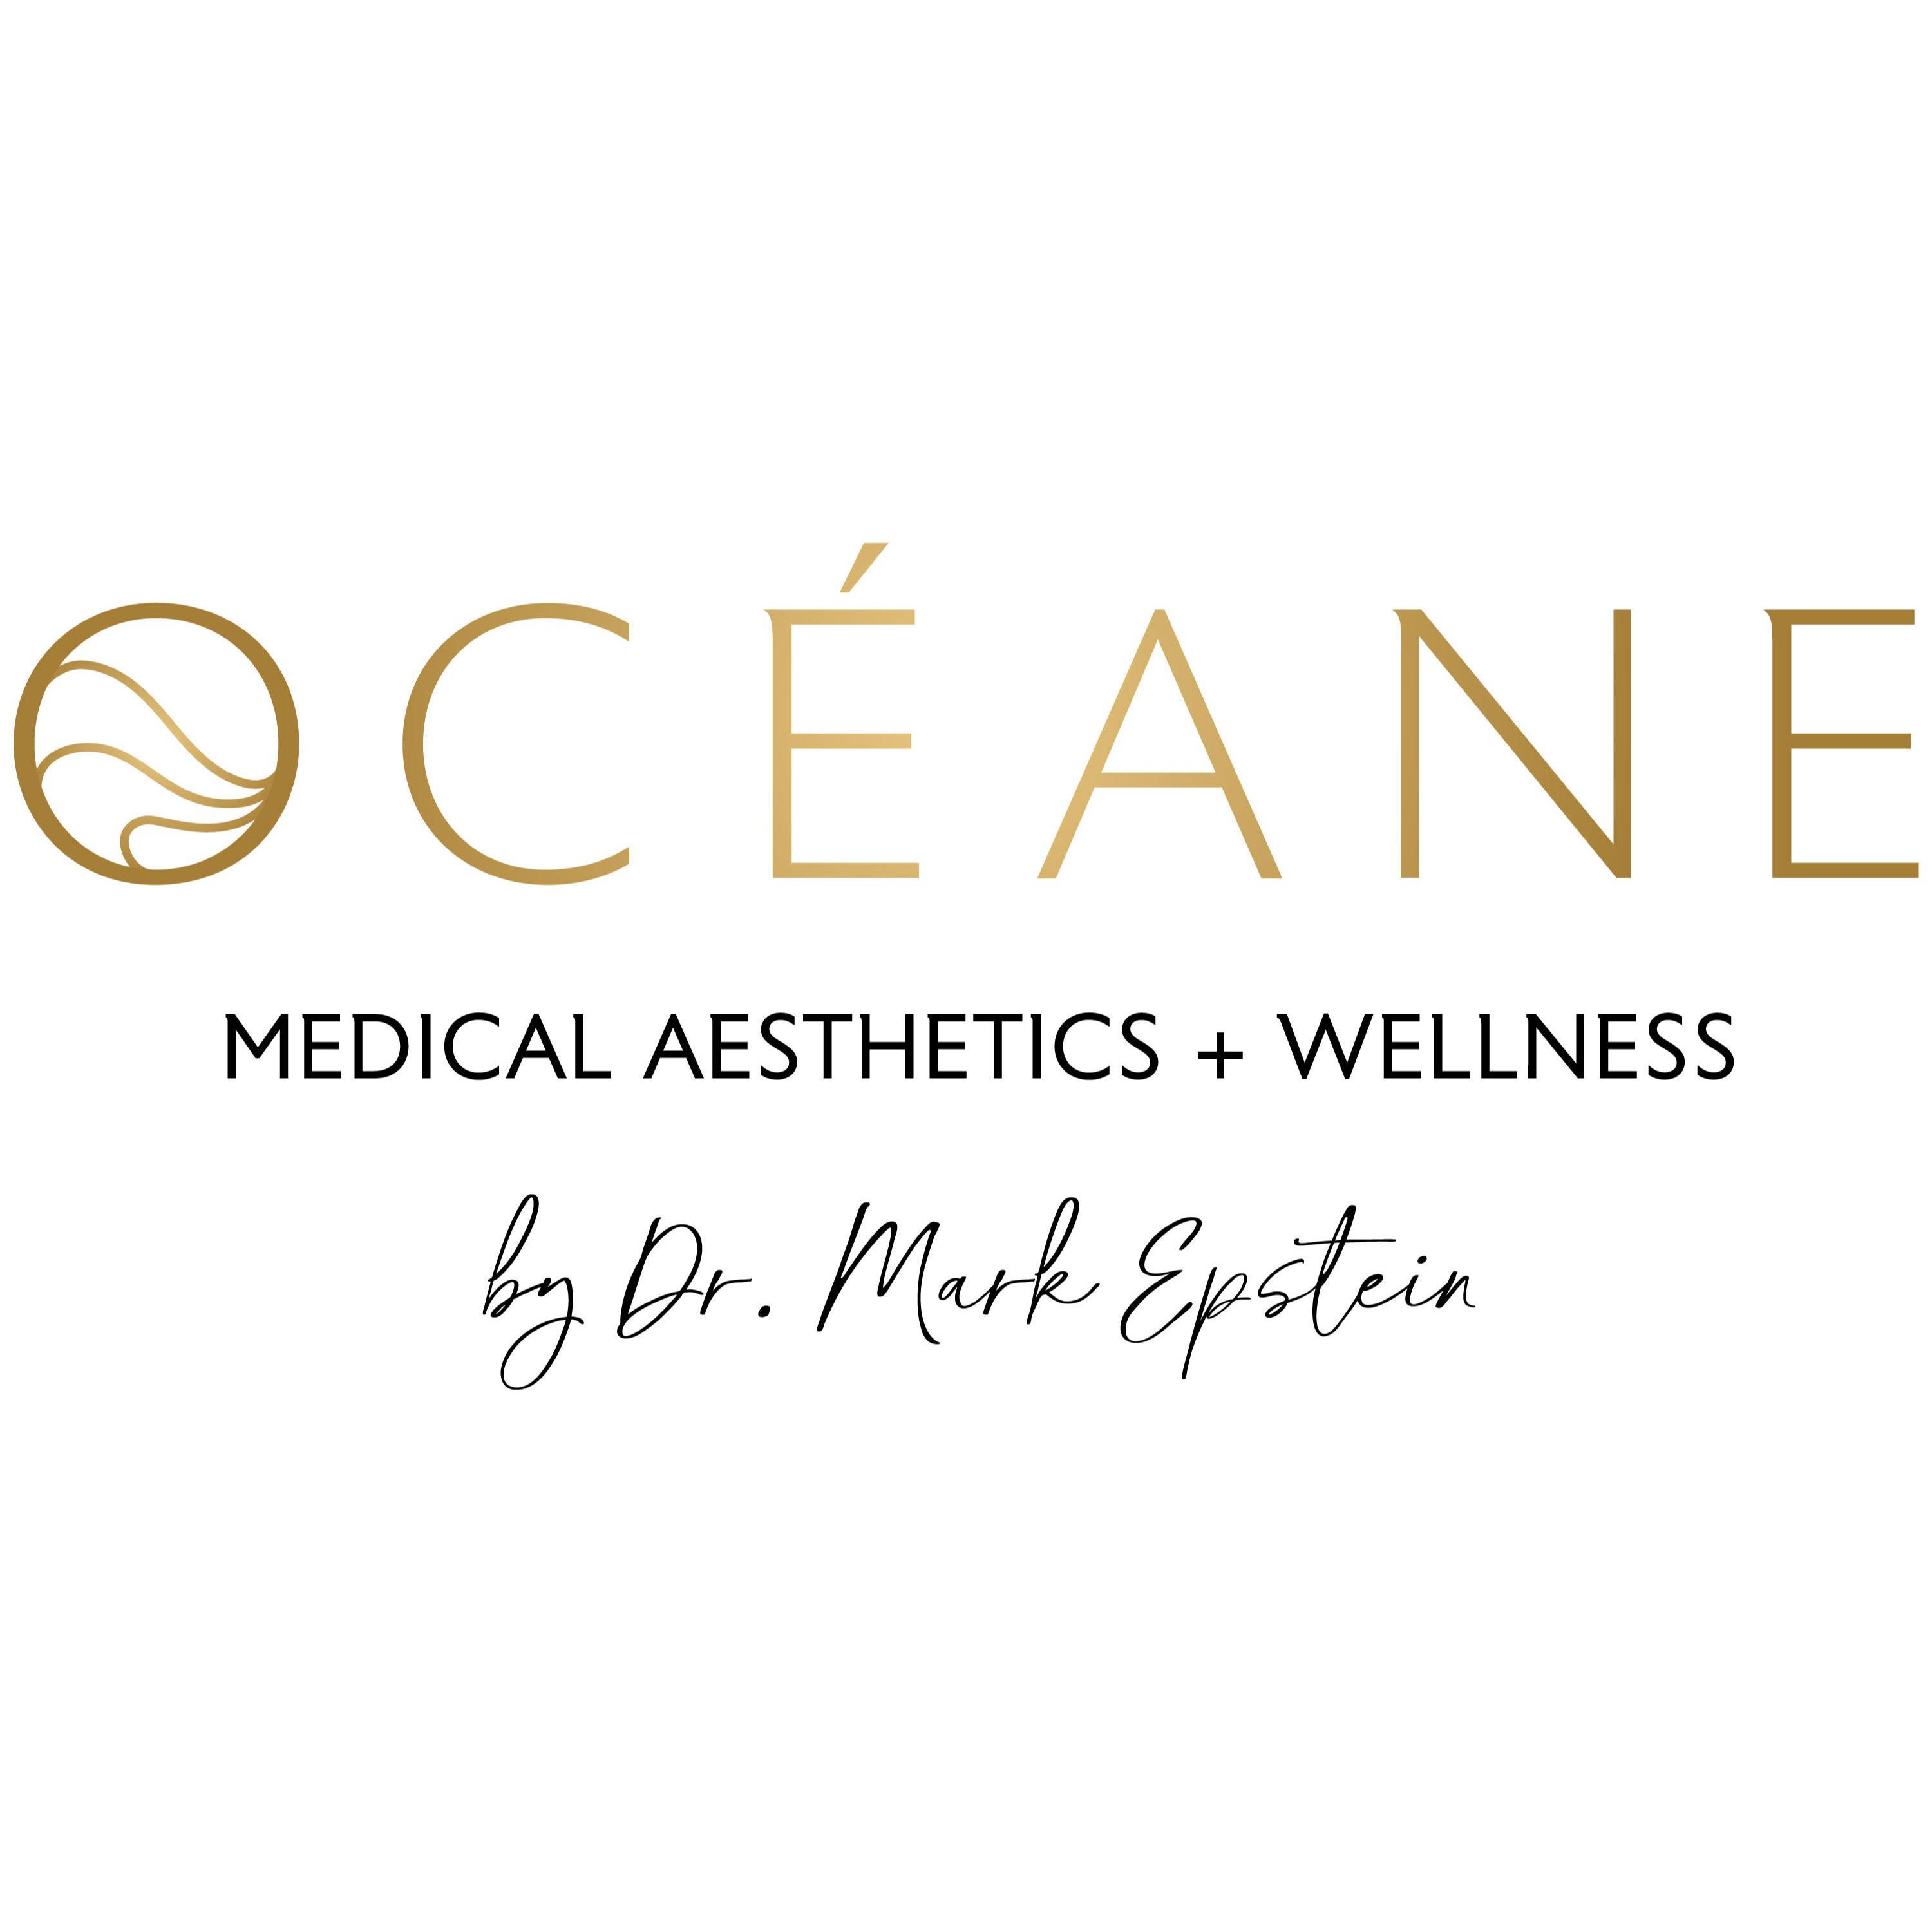 Oceane Medical Aesthetics and Wellness By Dr. Mark Epstein - Hauppauge, NY 11788 - (631)638-6800 | ShowMeLocal.com